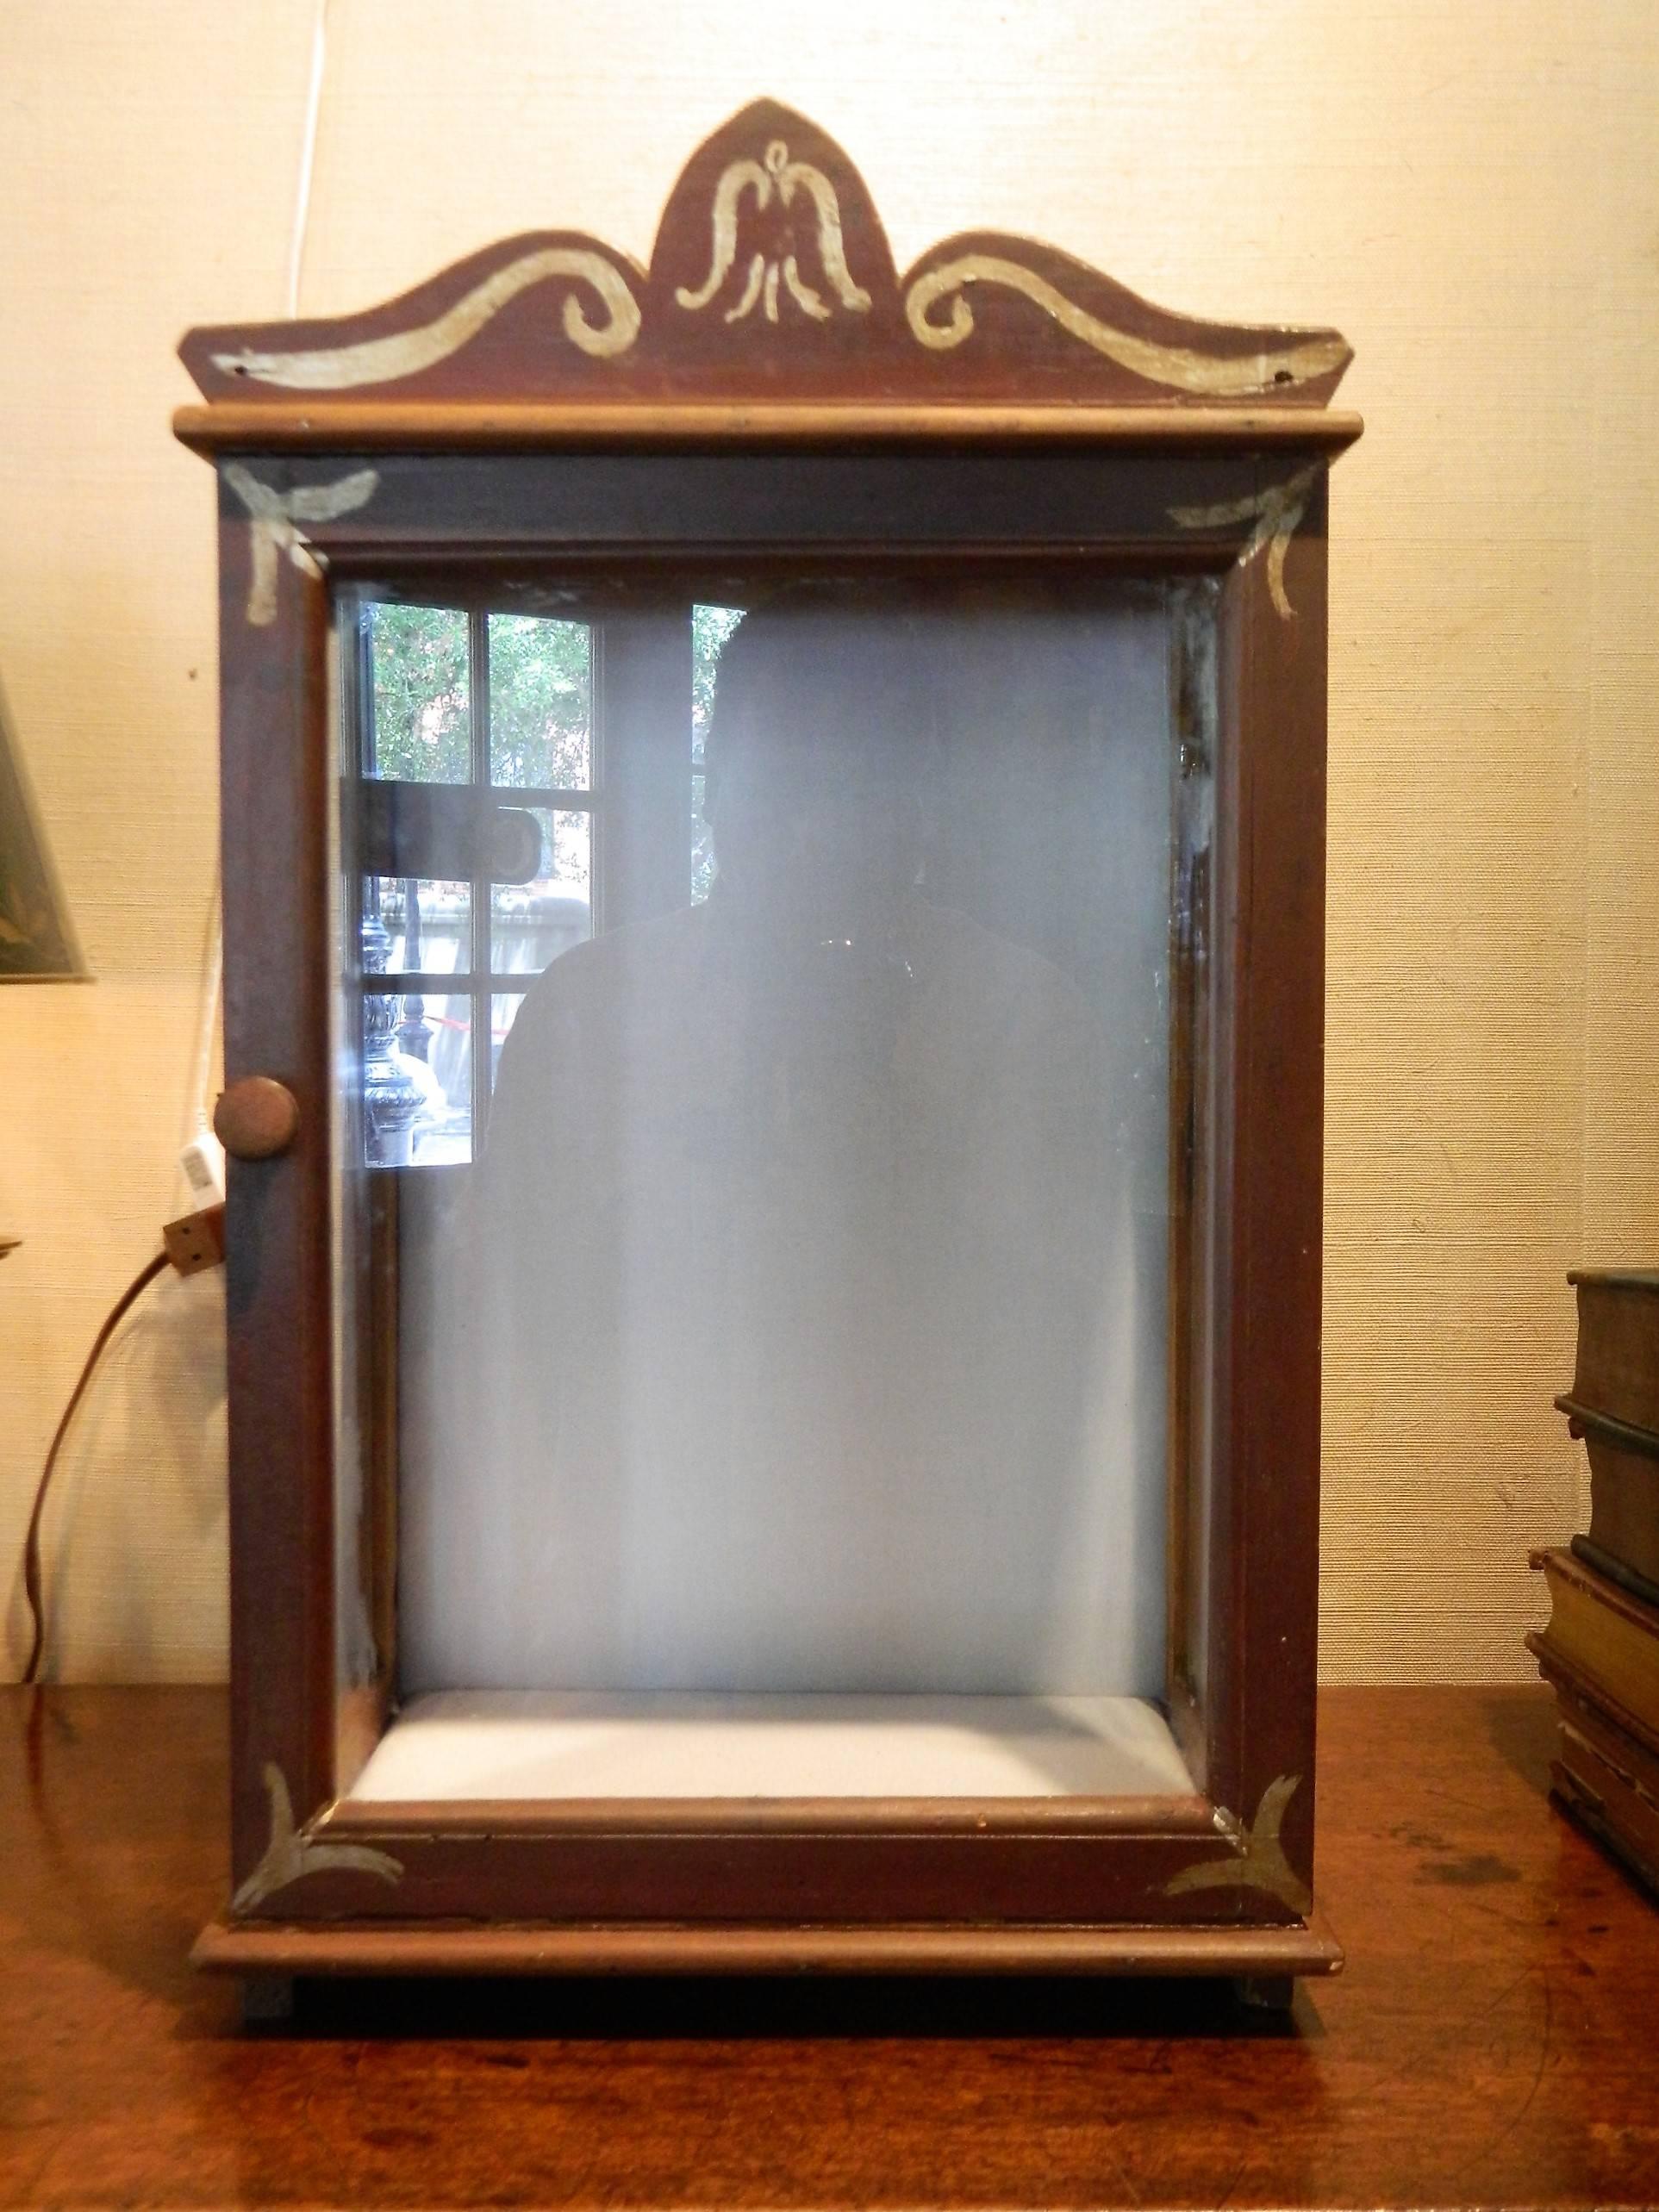 Late 19th-early 20th century painted display vitrine or niche cabinet. Interior has been upholstered in an off-white fabric.
      